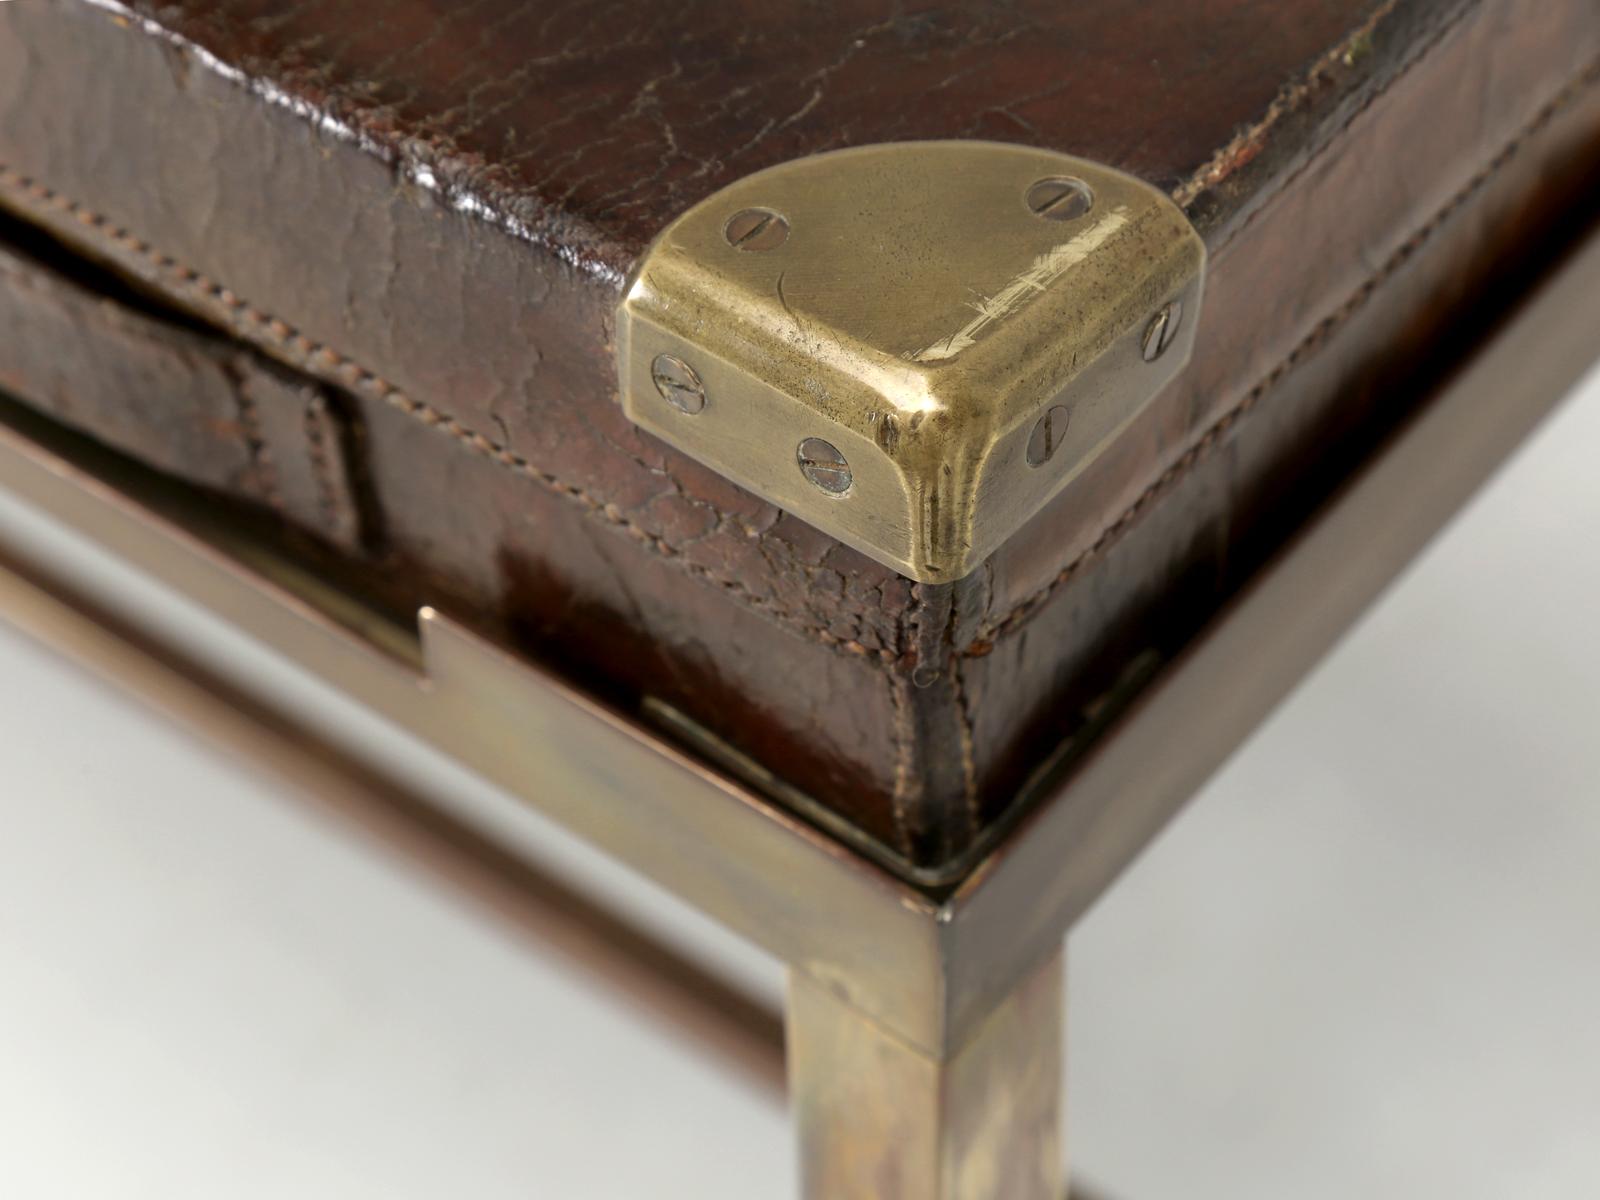 Antique William and Evans Leather Gun Case End Table with Brass Legs, c1900-1920 For Sale 4